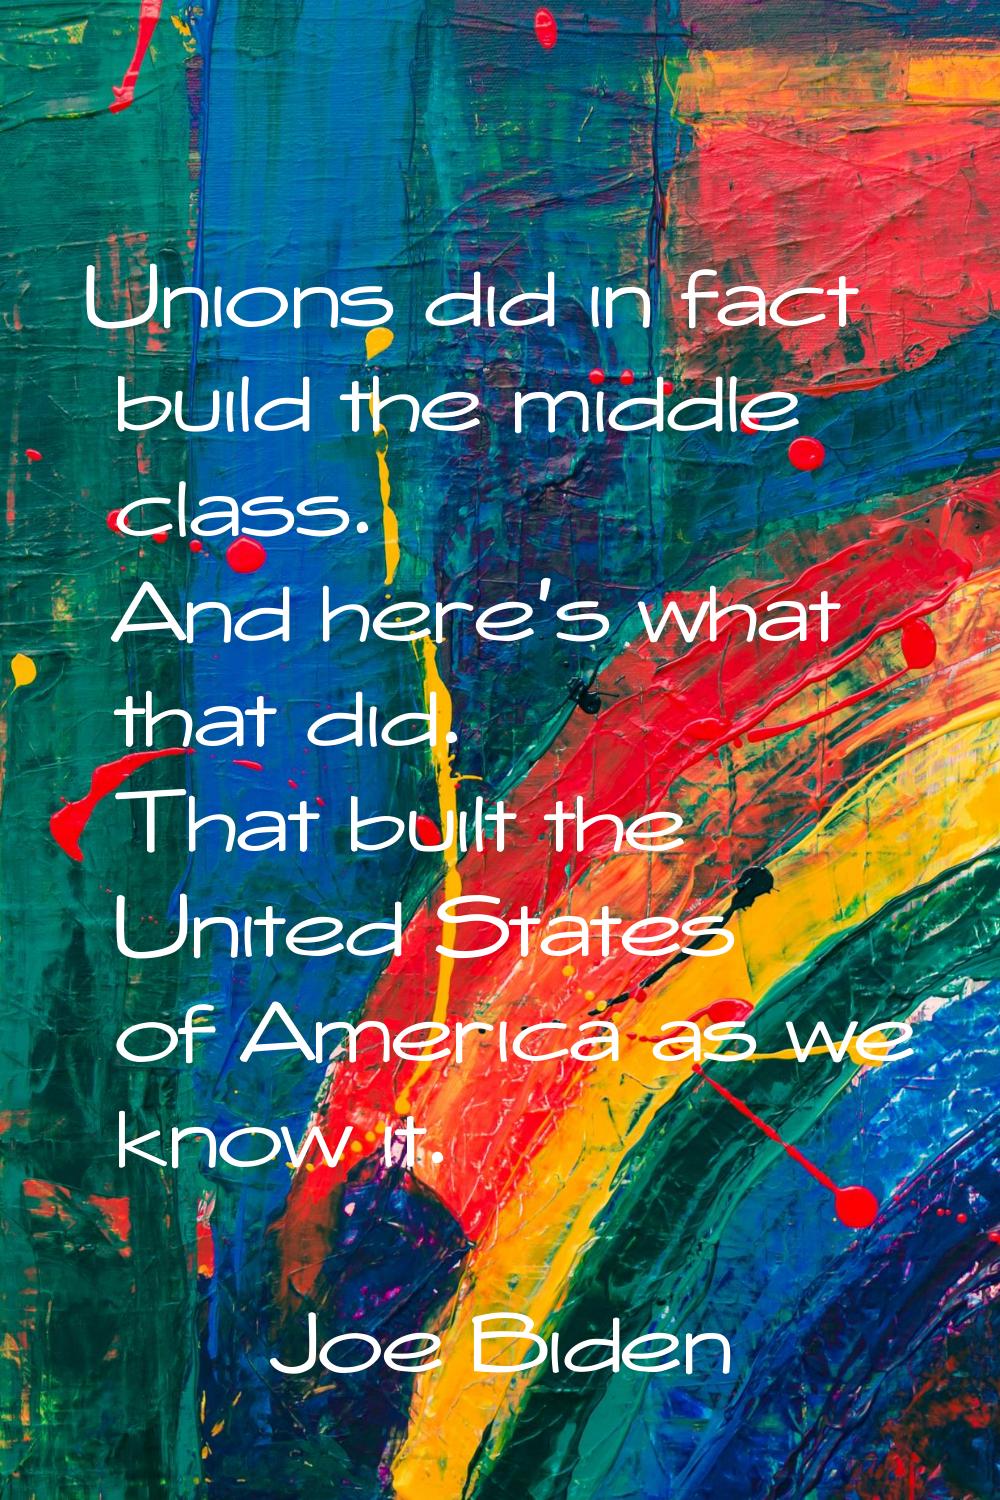 Unions did in fact build the middle class. And here's what that did. That built the United States o